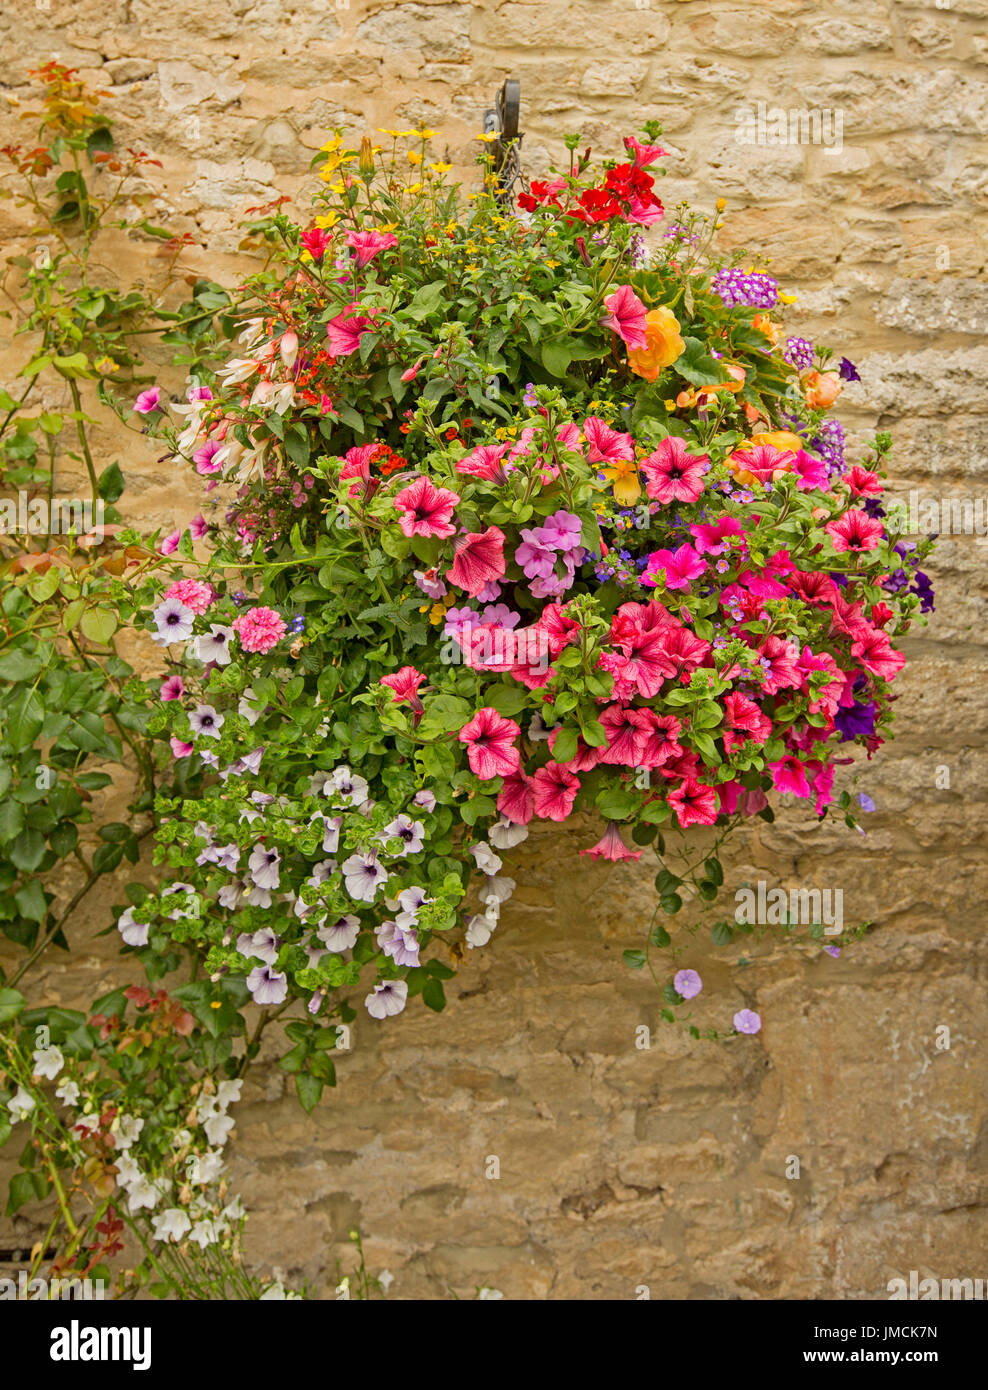 Mass of colourful flowering plants, inc.red and lilac petunias, begonias, and fuchsias in hanging basket against stone wall Stock Photo